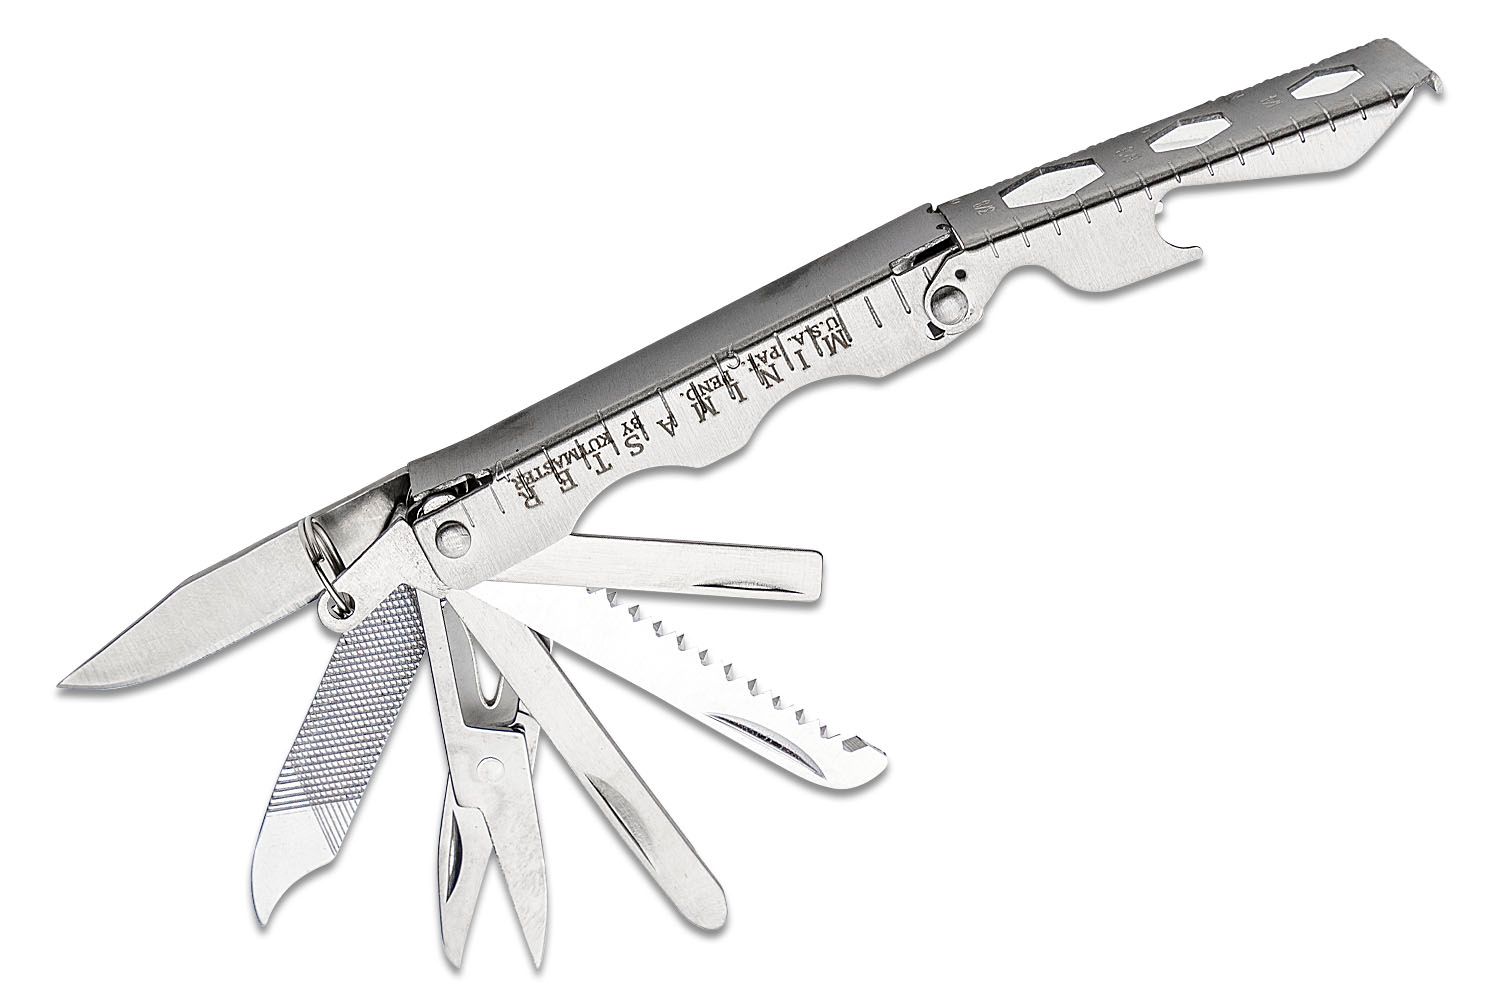 CAT 13-in-1 Multi-Tool and Pocket Knives Gift Box Set (3-Piece